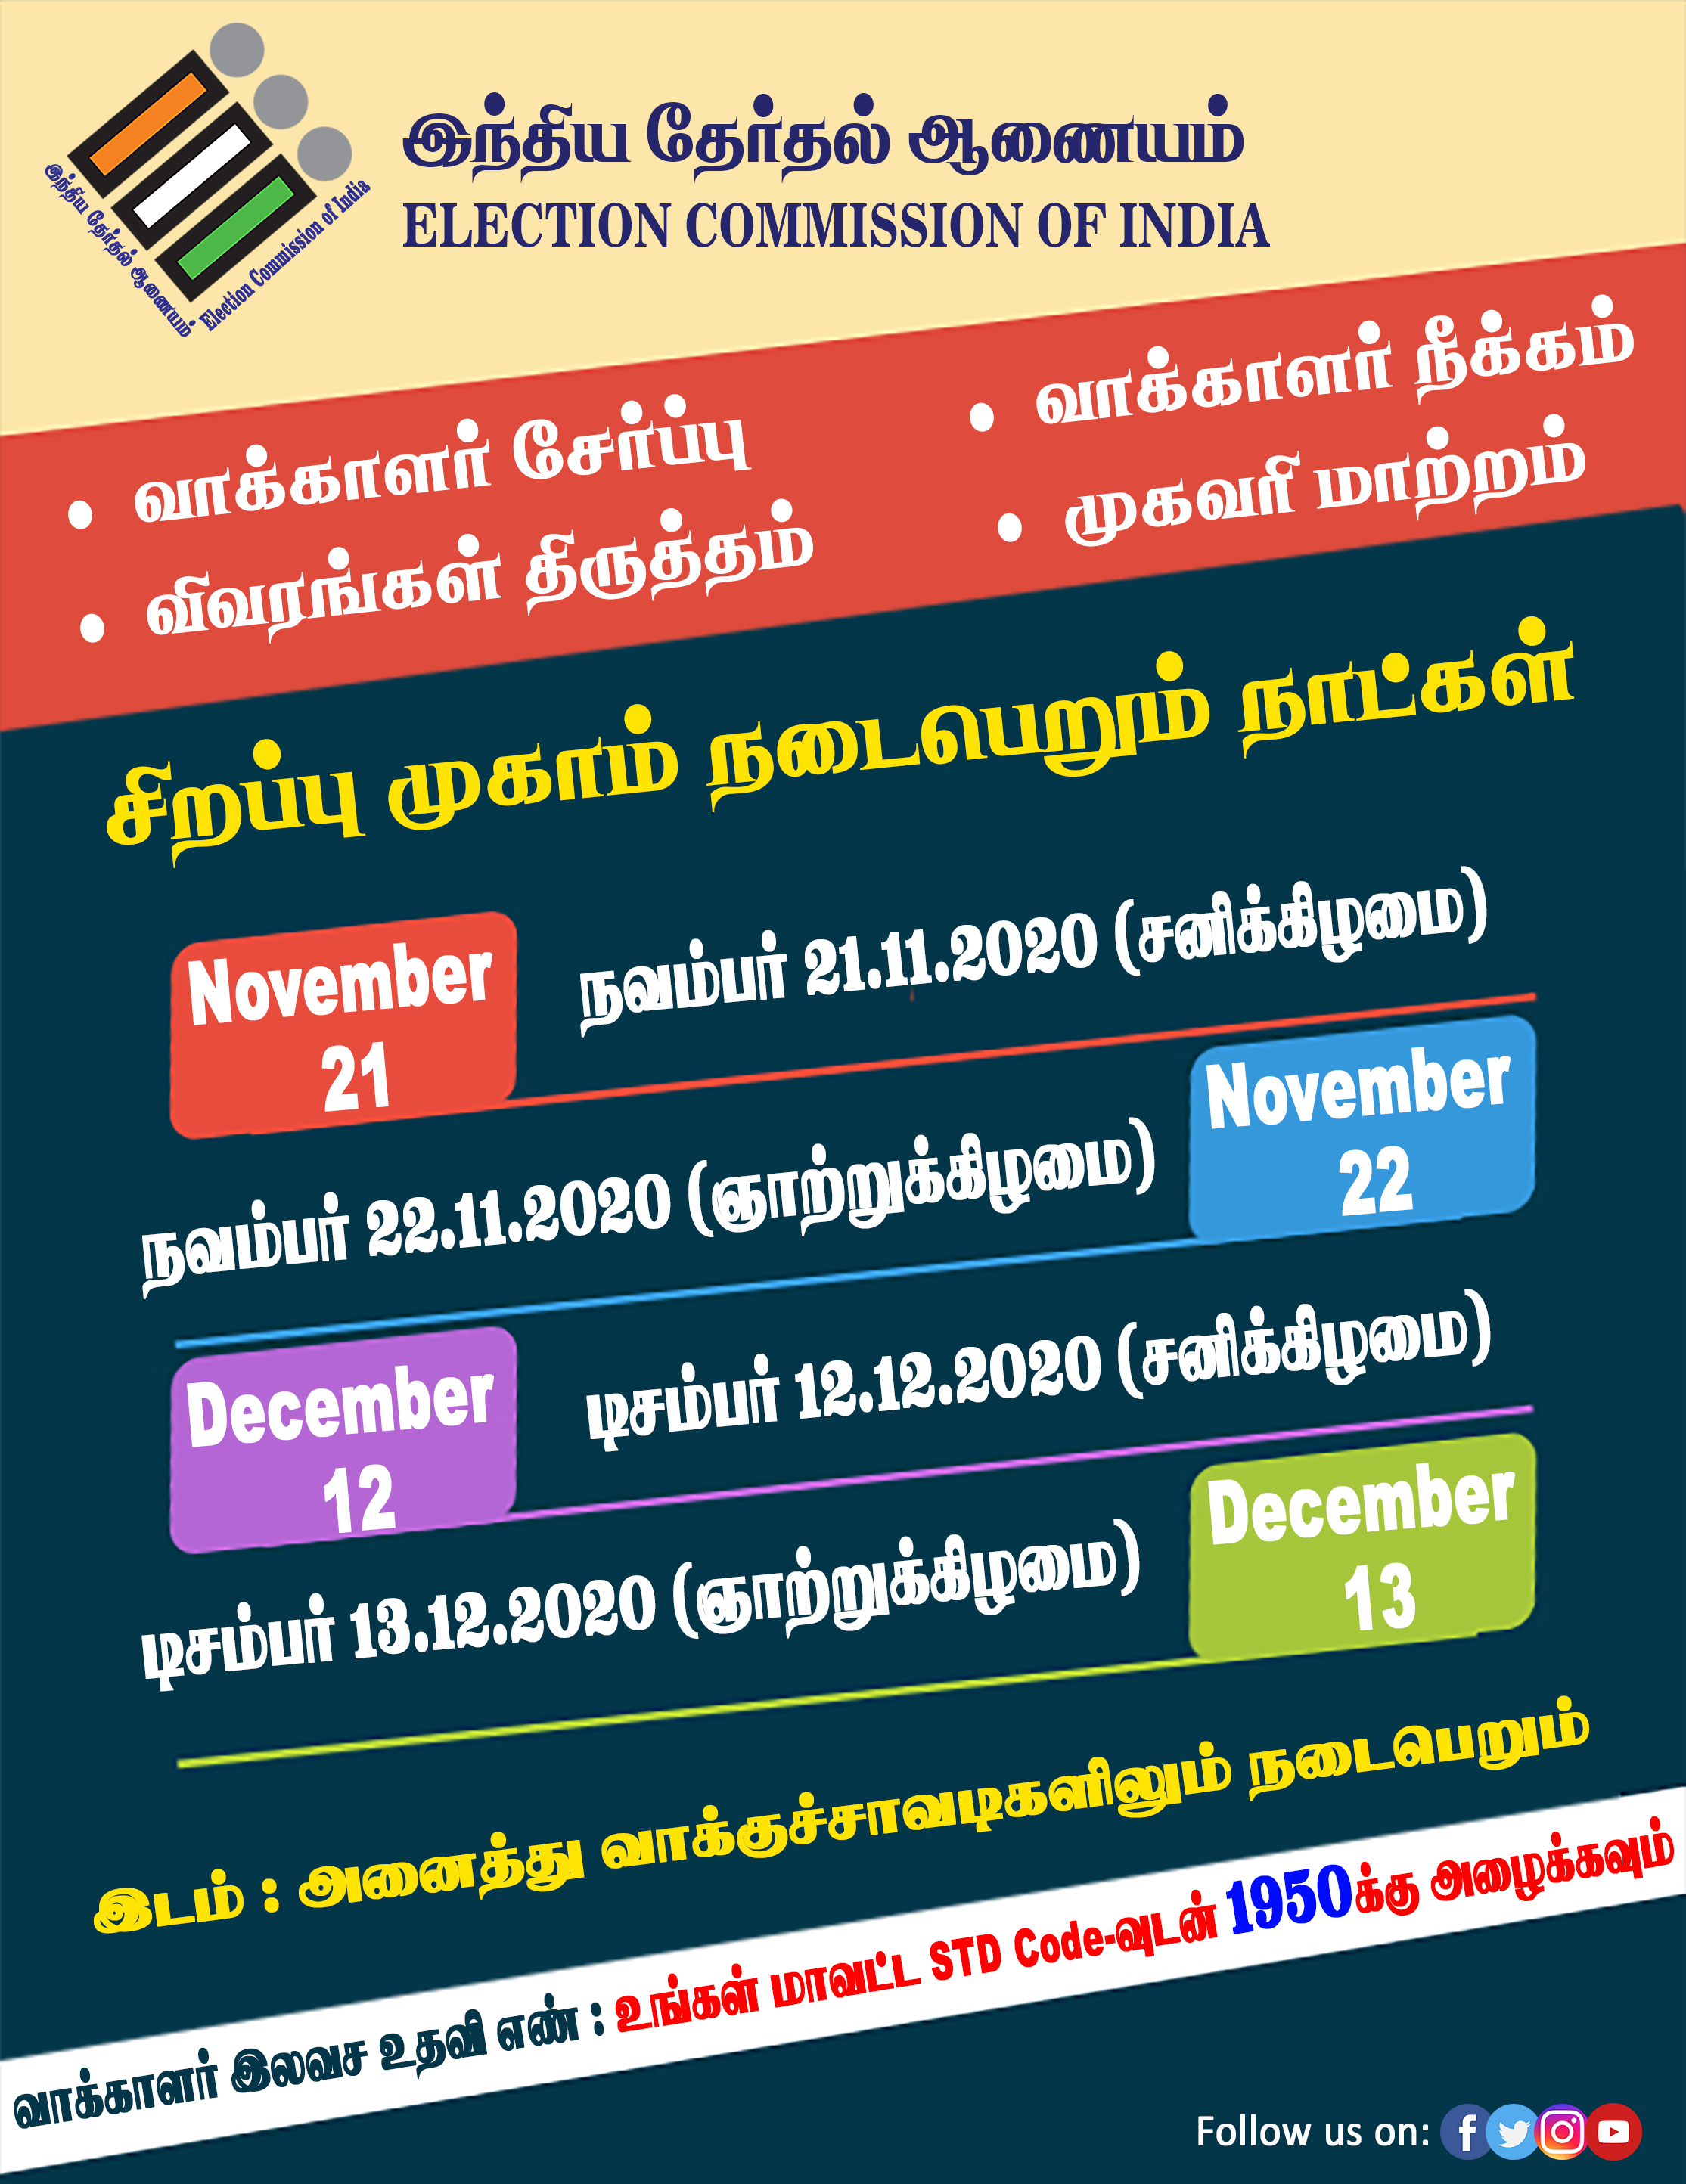 SVEEP_POSTERS_2020/Special Campaign Dates Poster.jpg